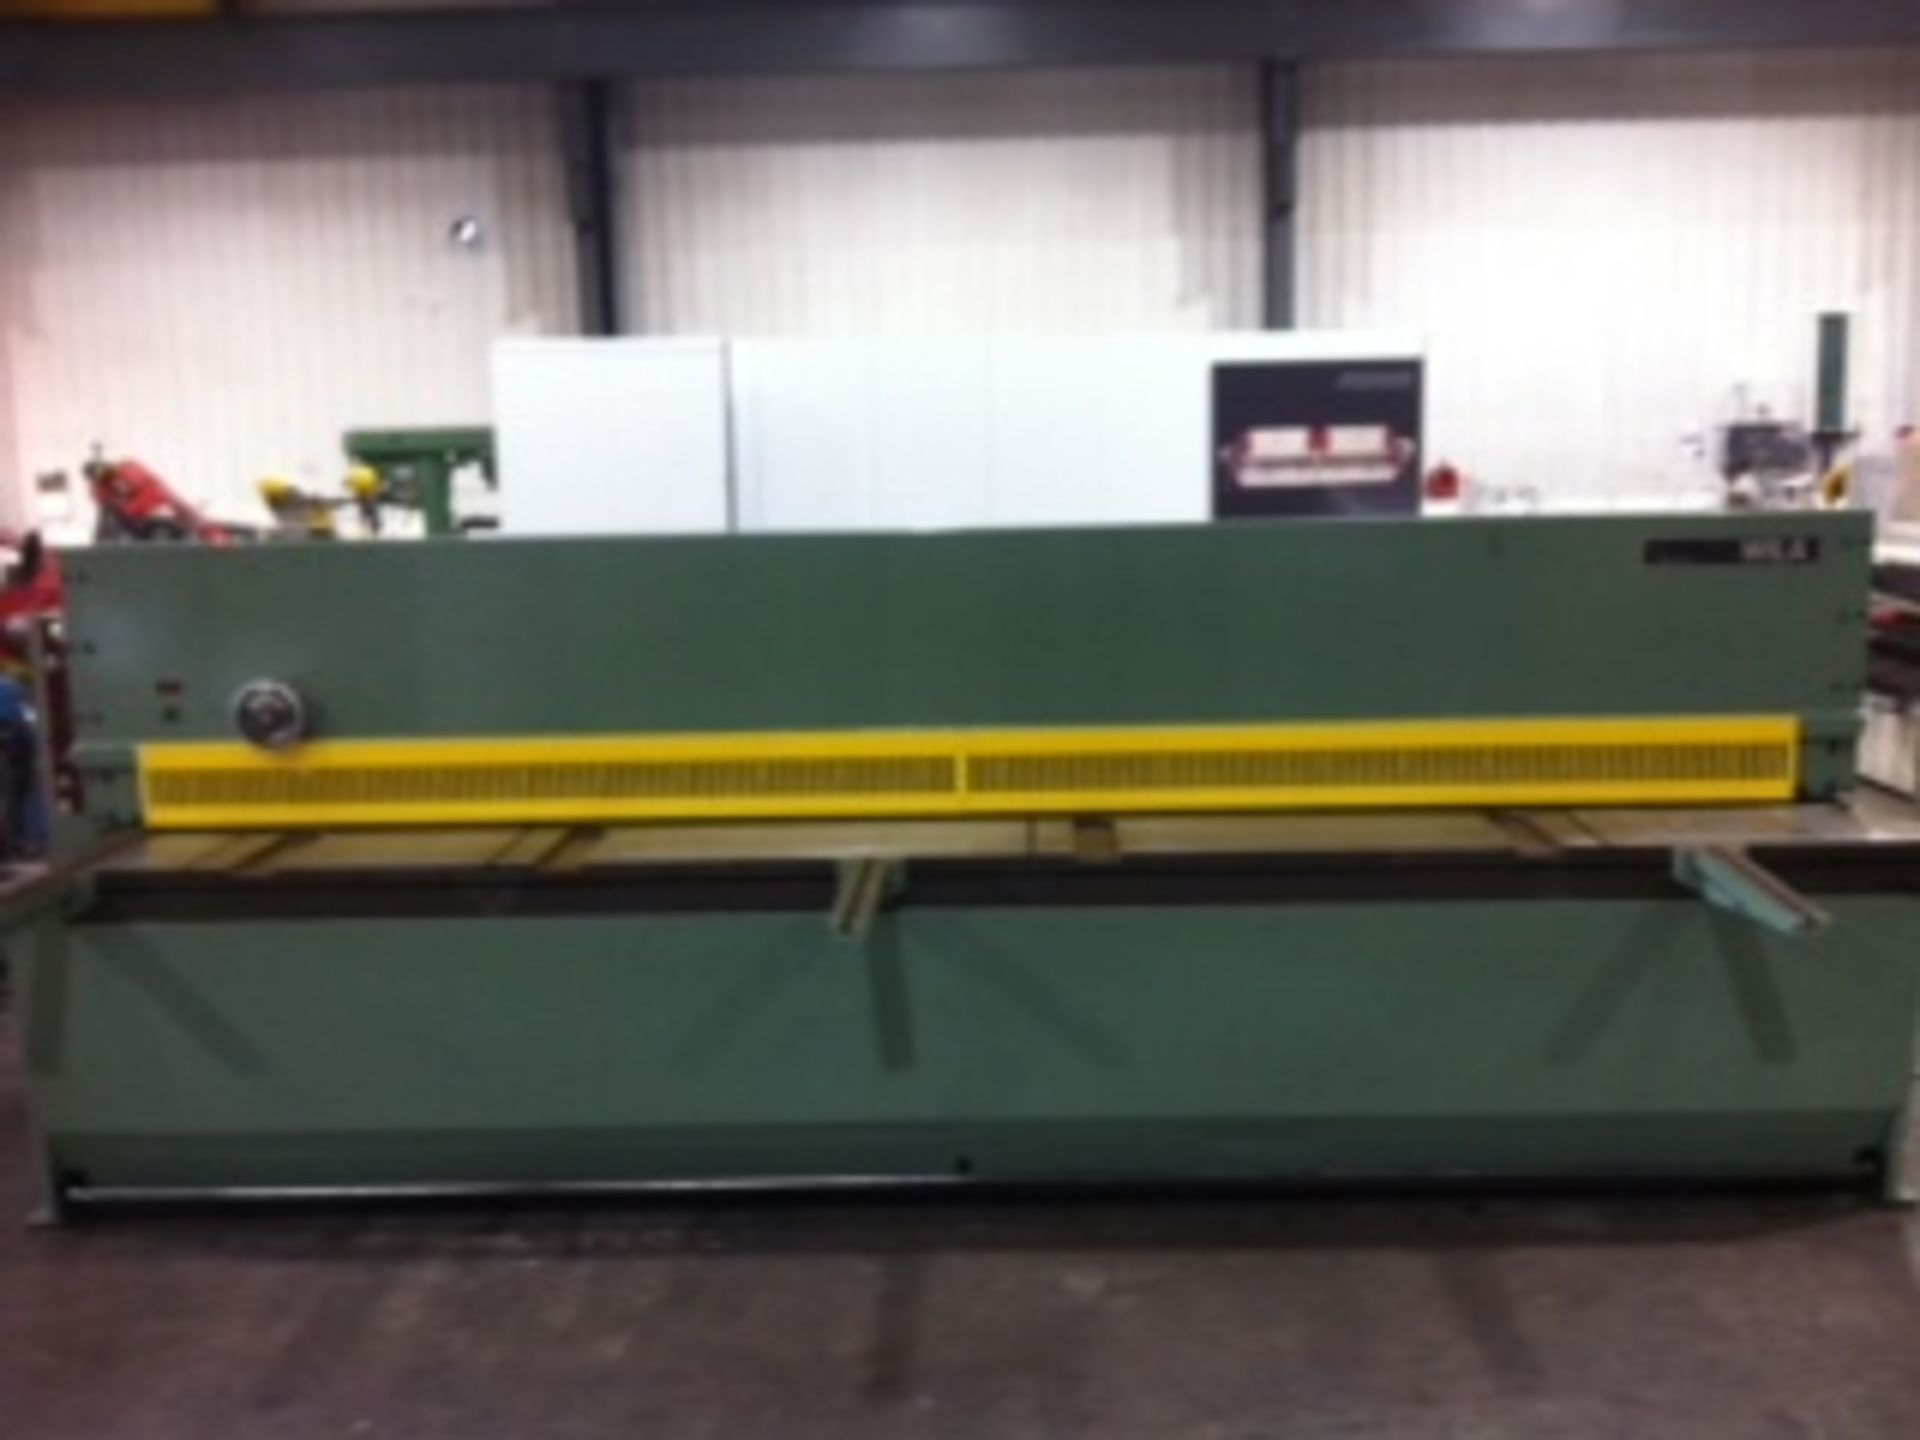 * Safan 4000 x 3mm Mechanical Guillotine with power backgauge ; valve needs attention